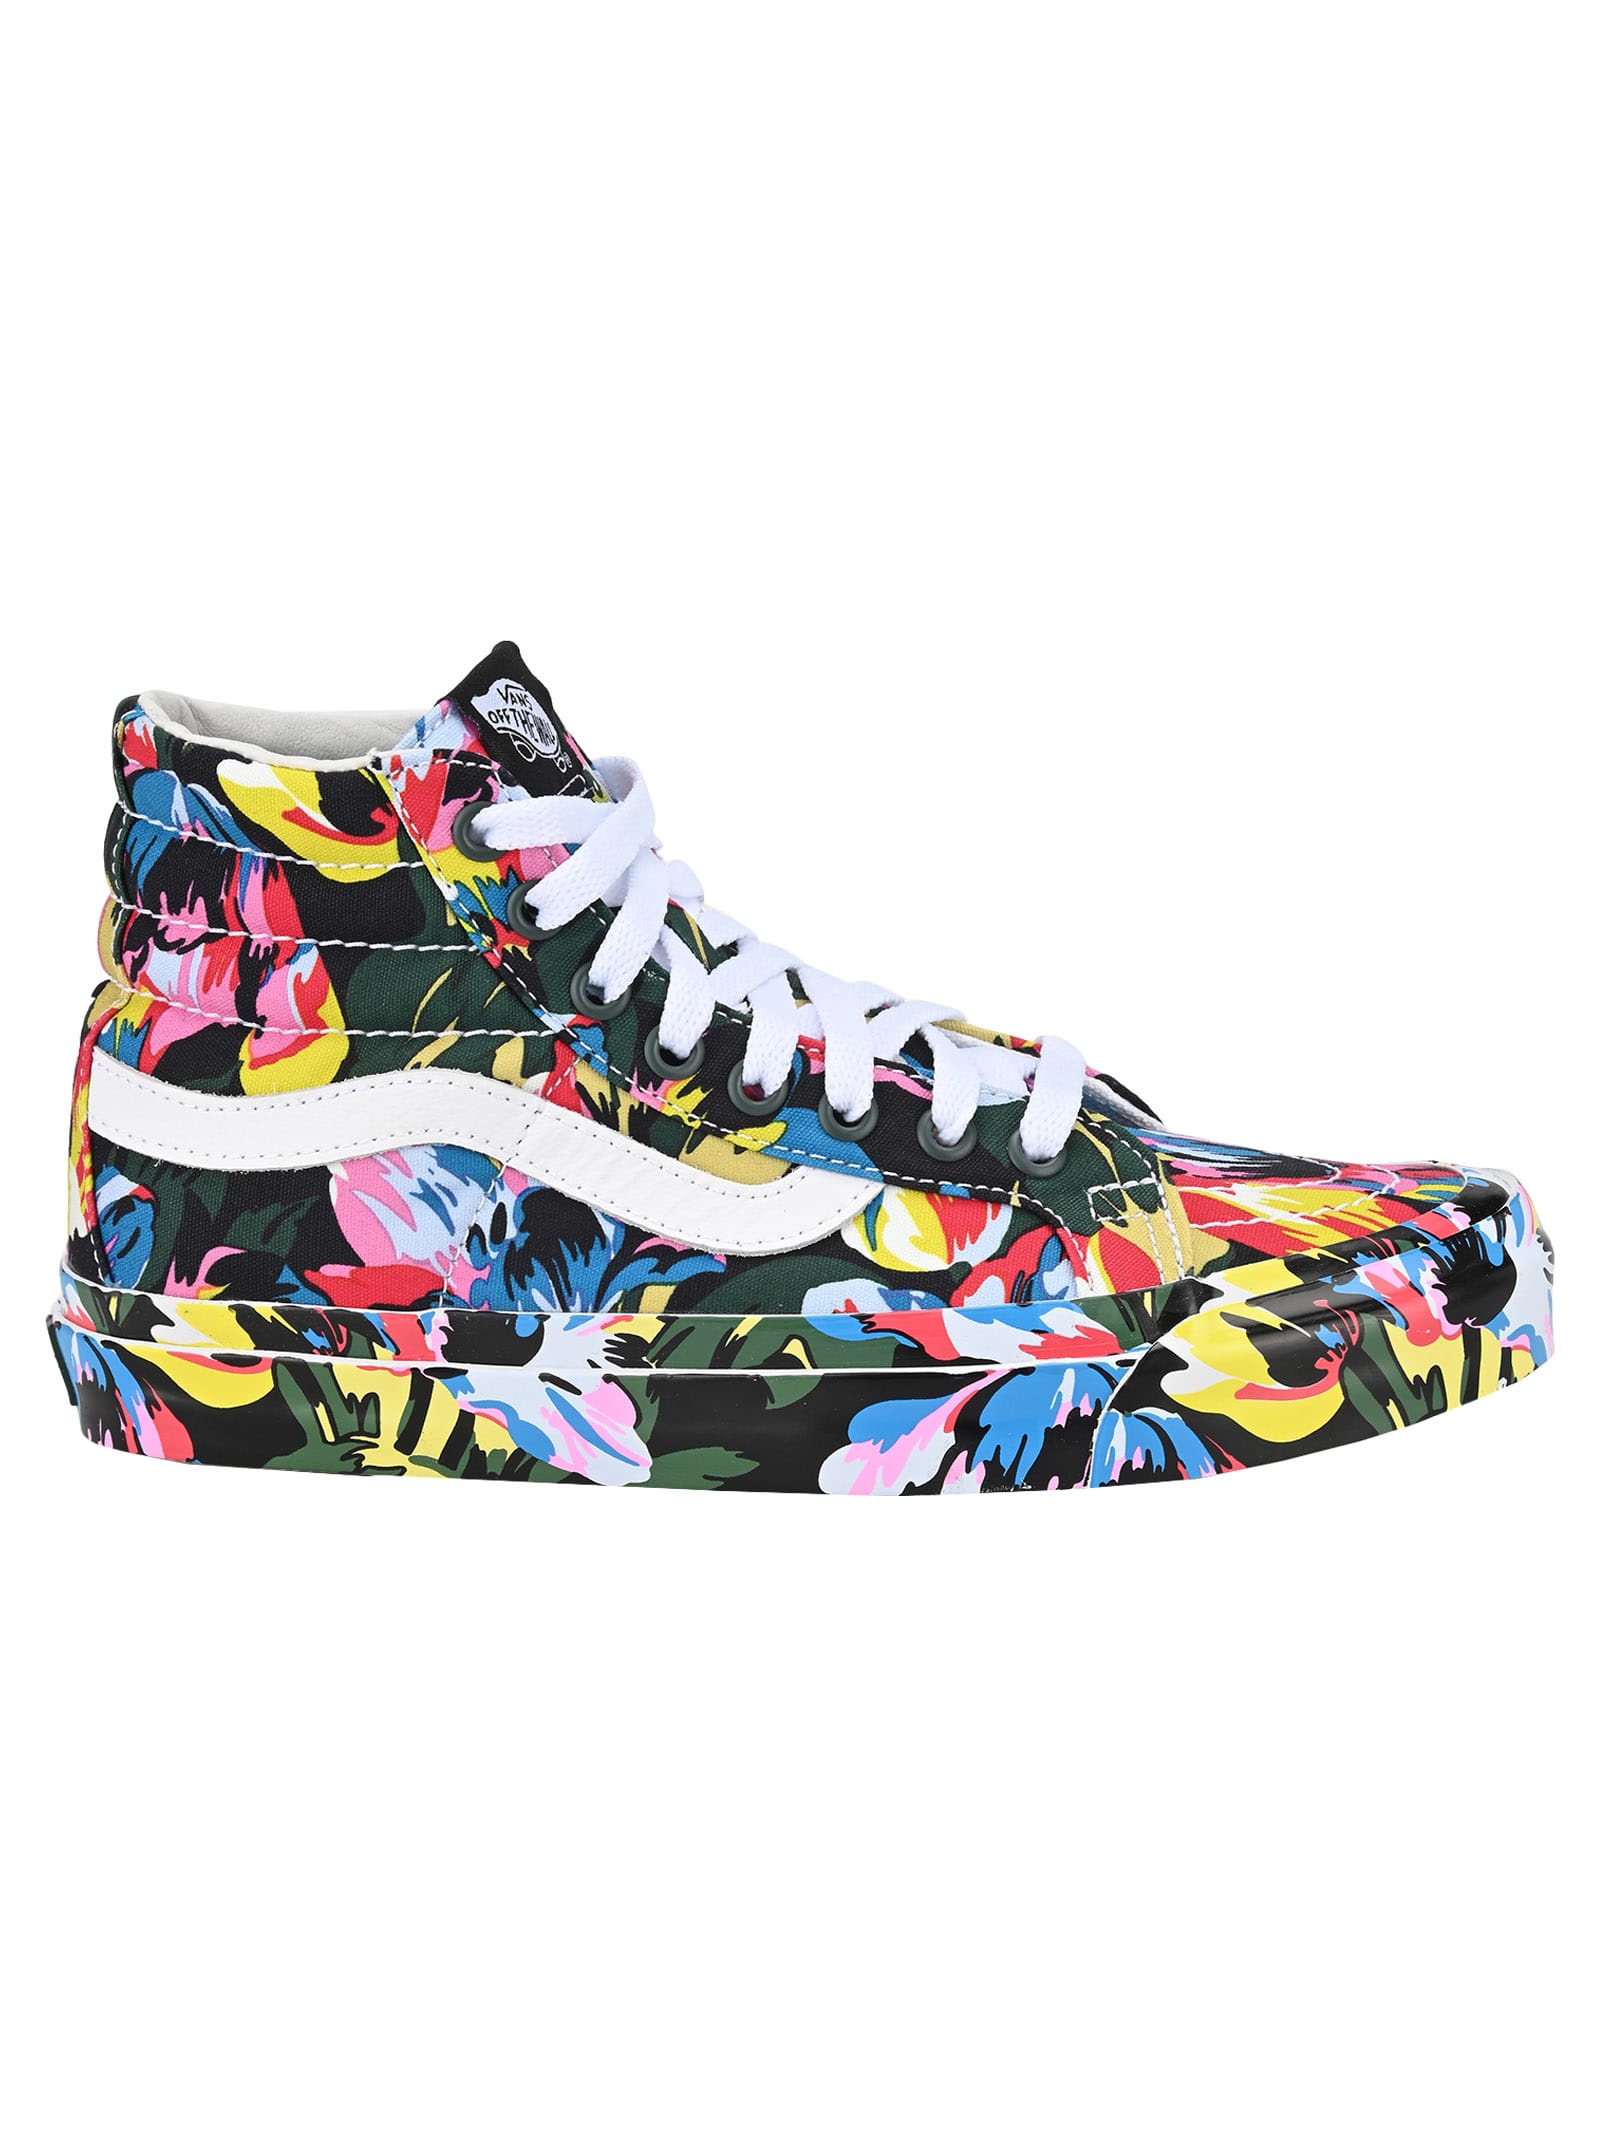 Buy Kenzo X Vans Sk8-hi Sneakers online, shop Kenzo shoes with free shipping